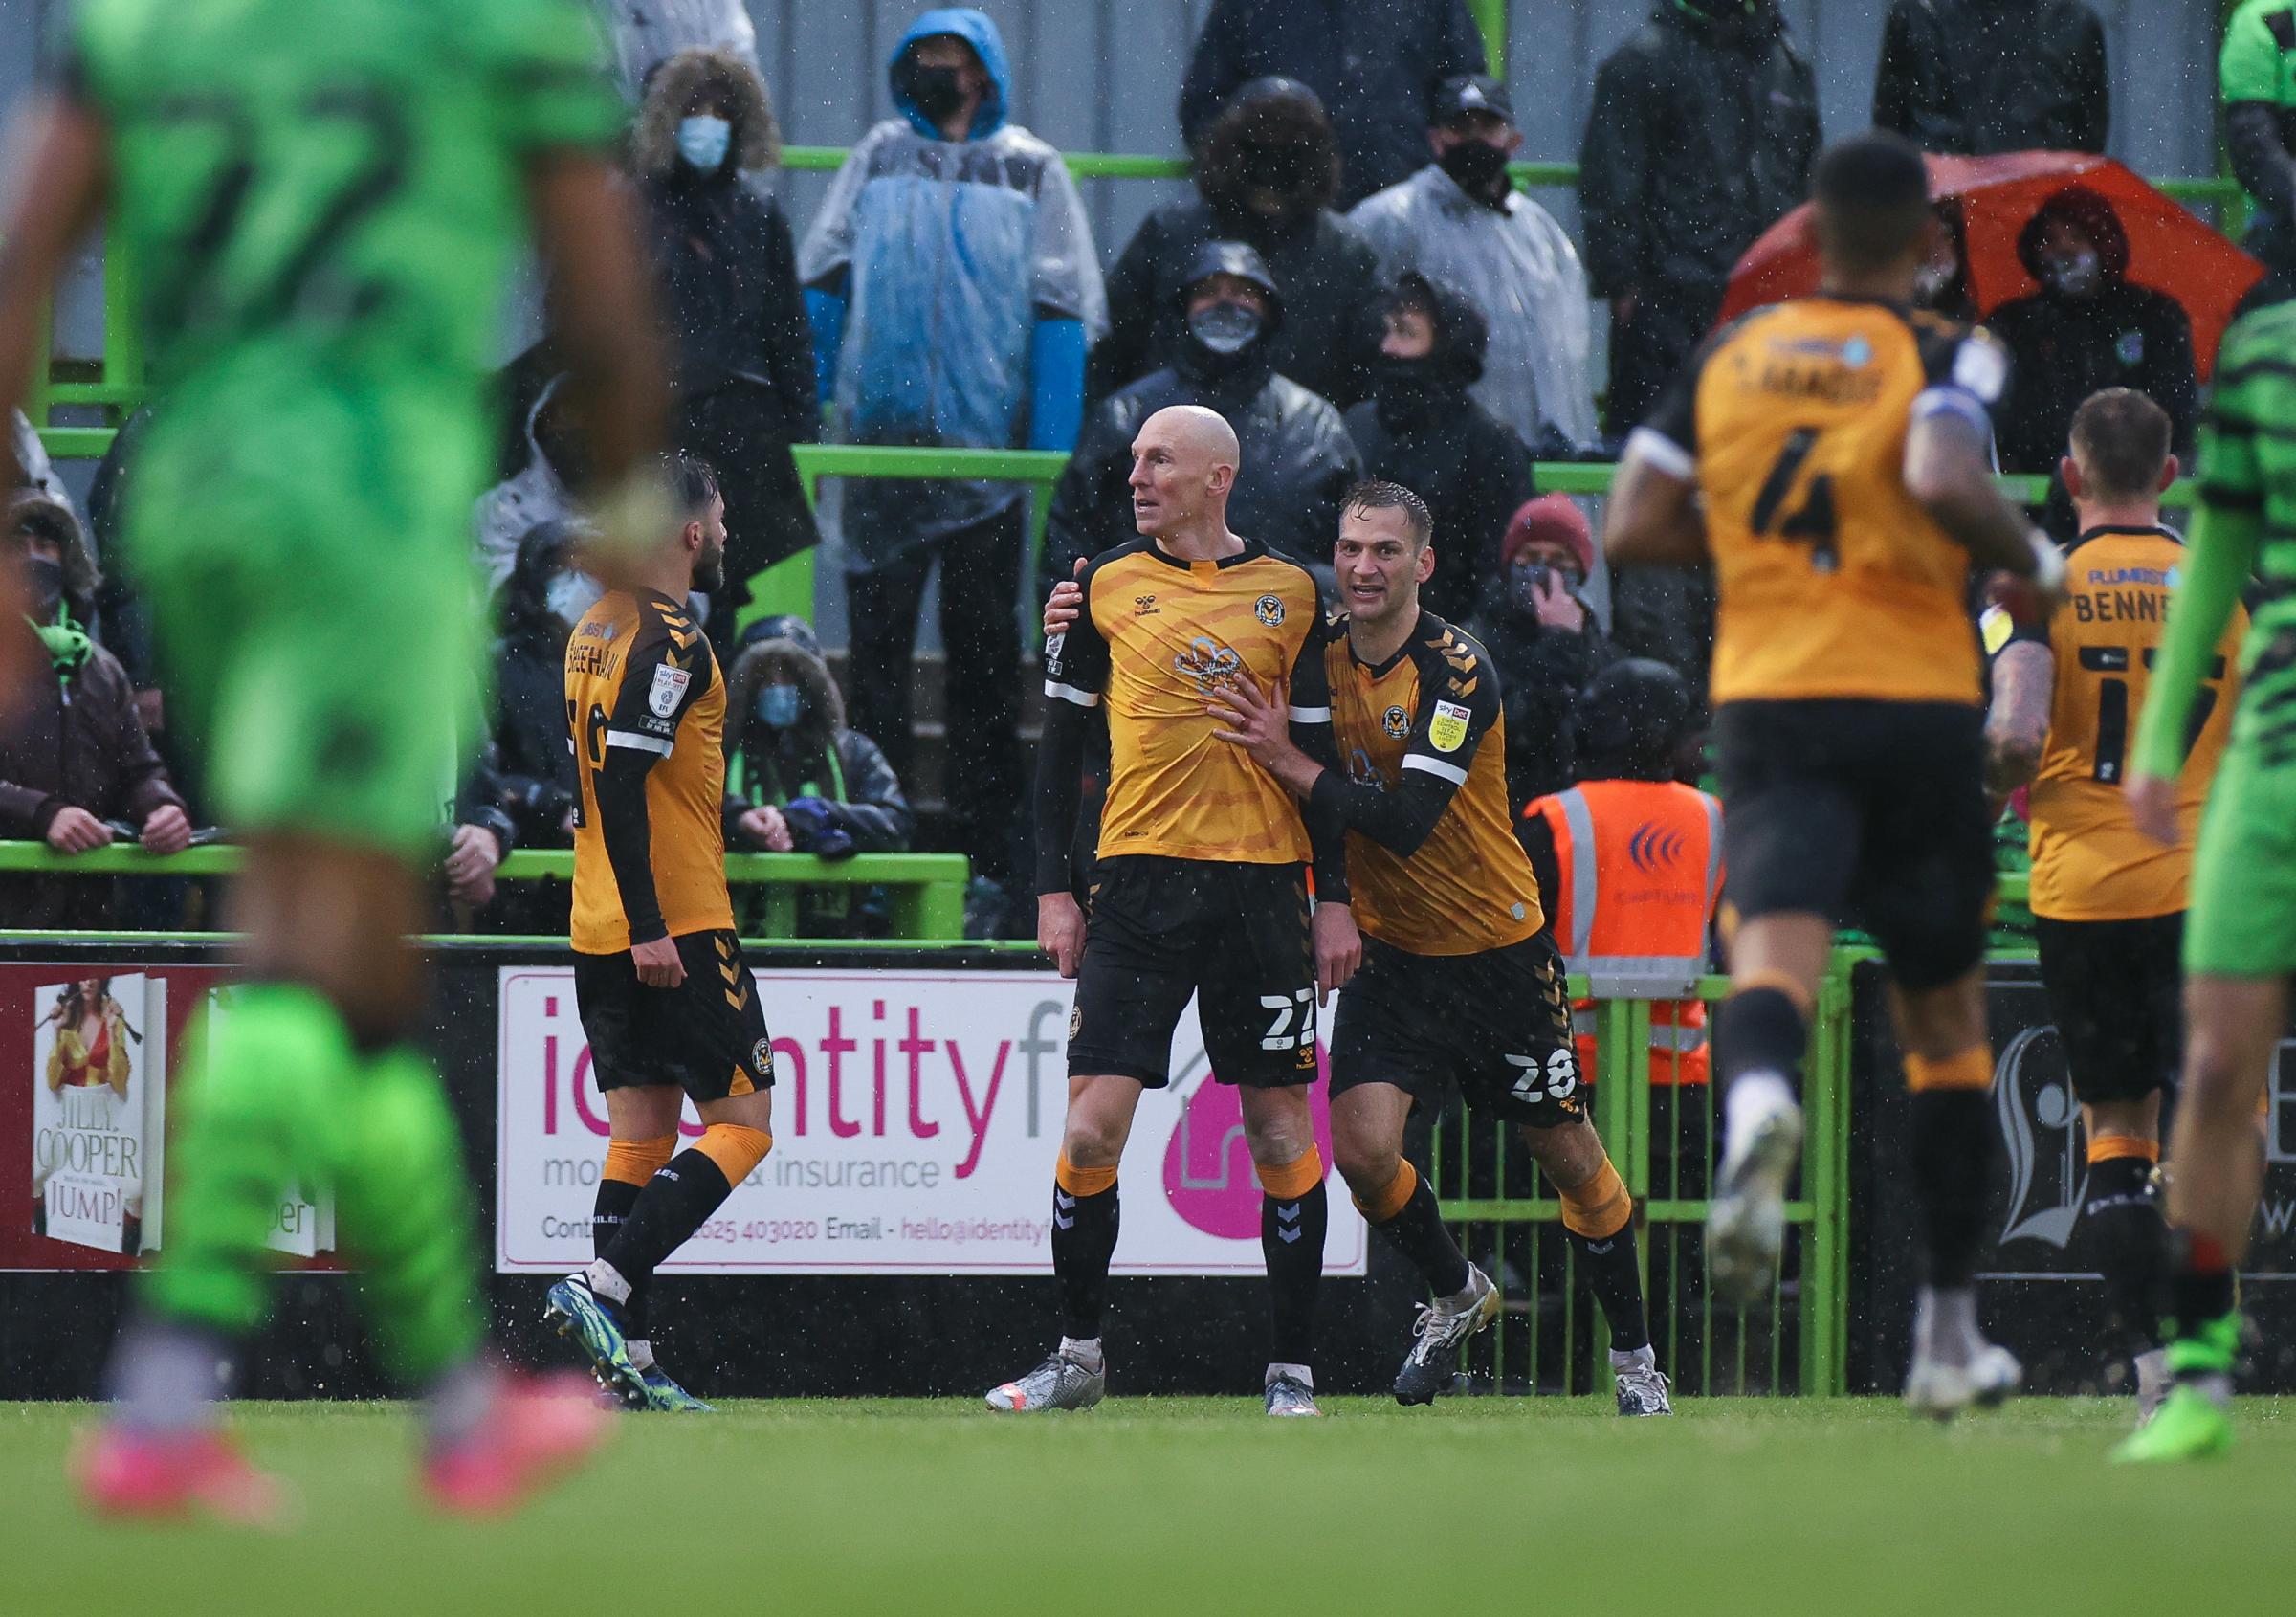 23.05.21 - Forest Green Rovers v Newport County - SkyBet League Two Play off Semi-Final, Second Leg - Kevin Ellison of Newport County wheels away to celebrate with team mates after scoring goal